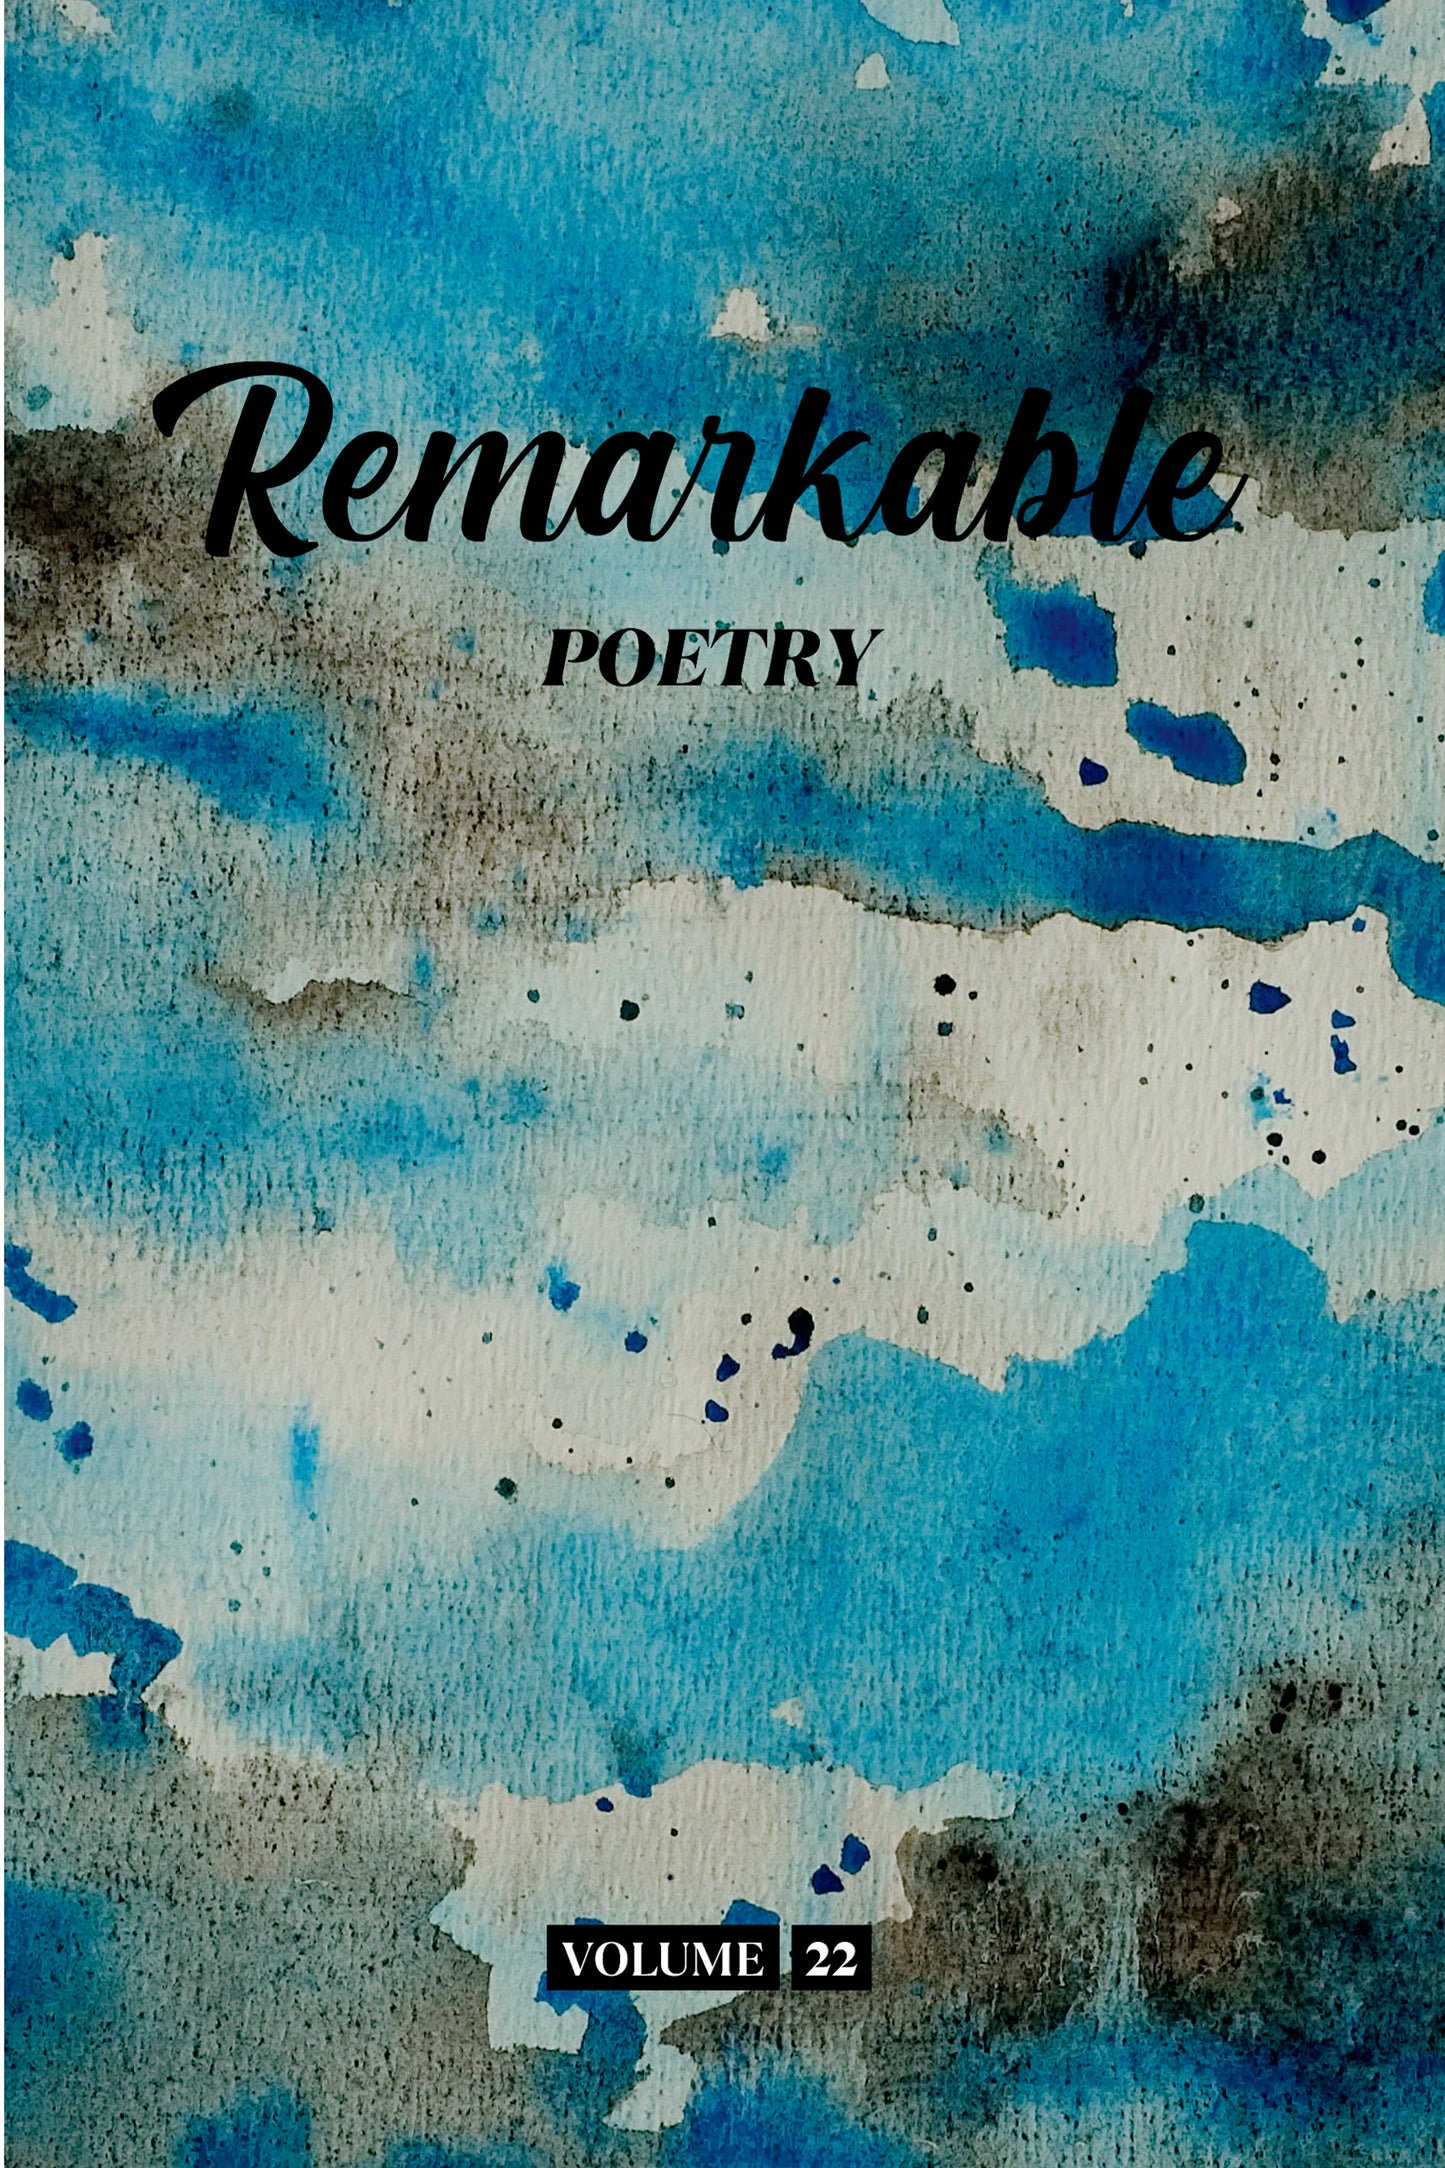 Remarkable Poetry (Volume 22) - Physical Book (Pre-Order)